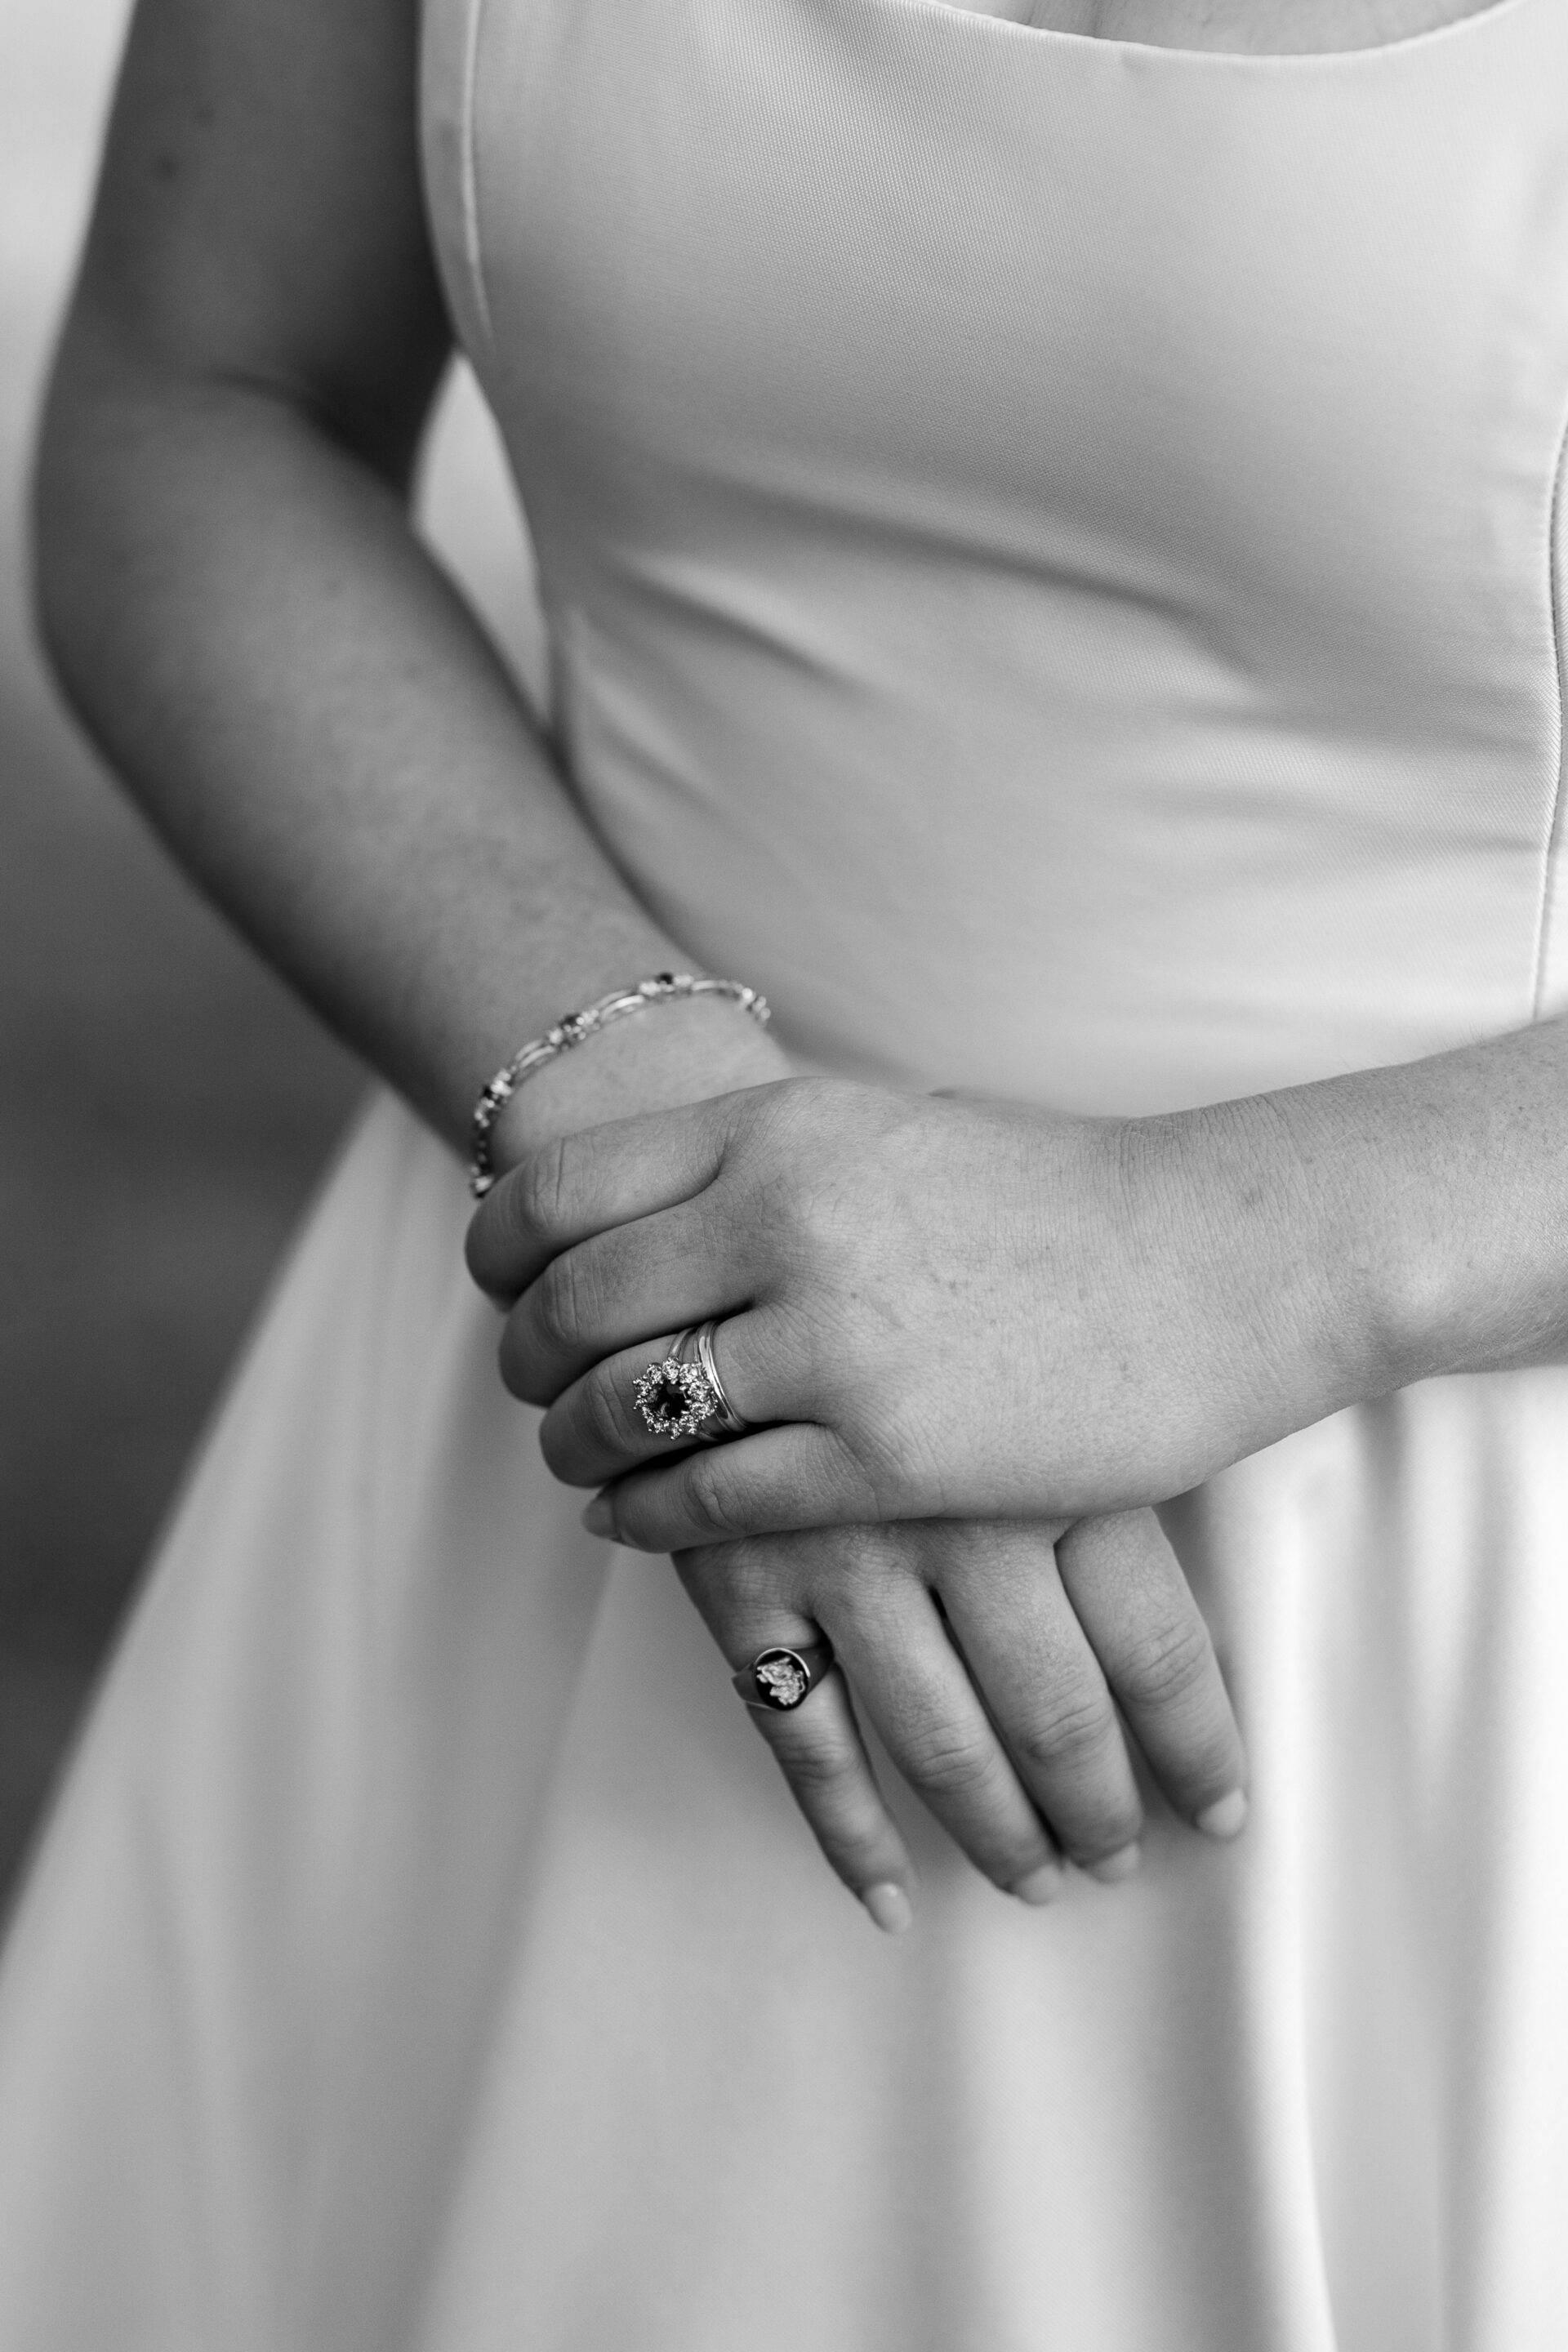 A detail shot of the bride's wedding ring and jewellery